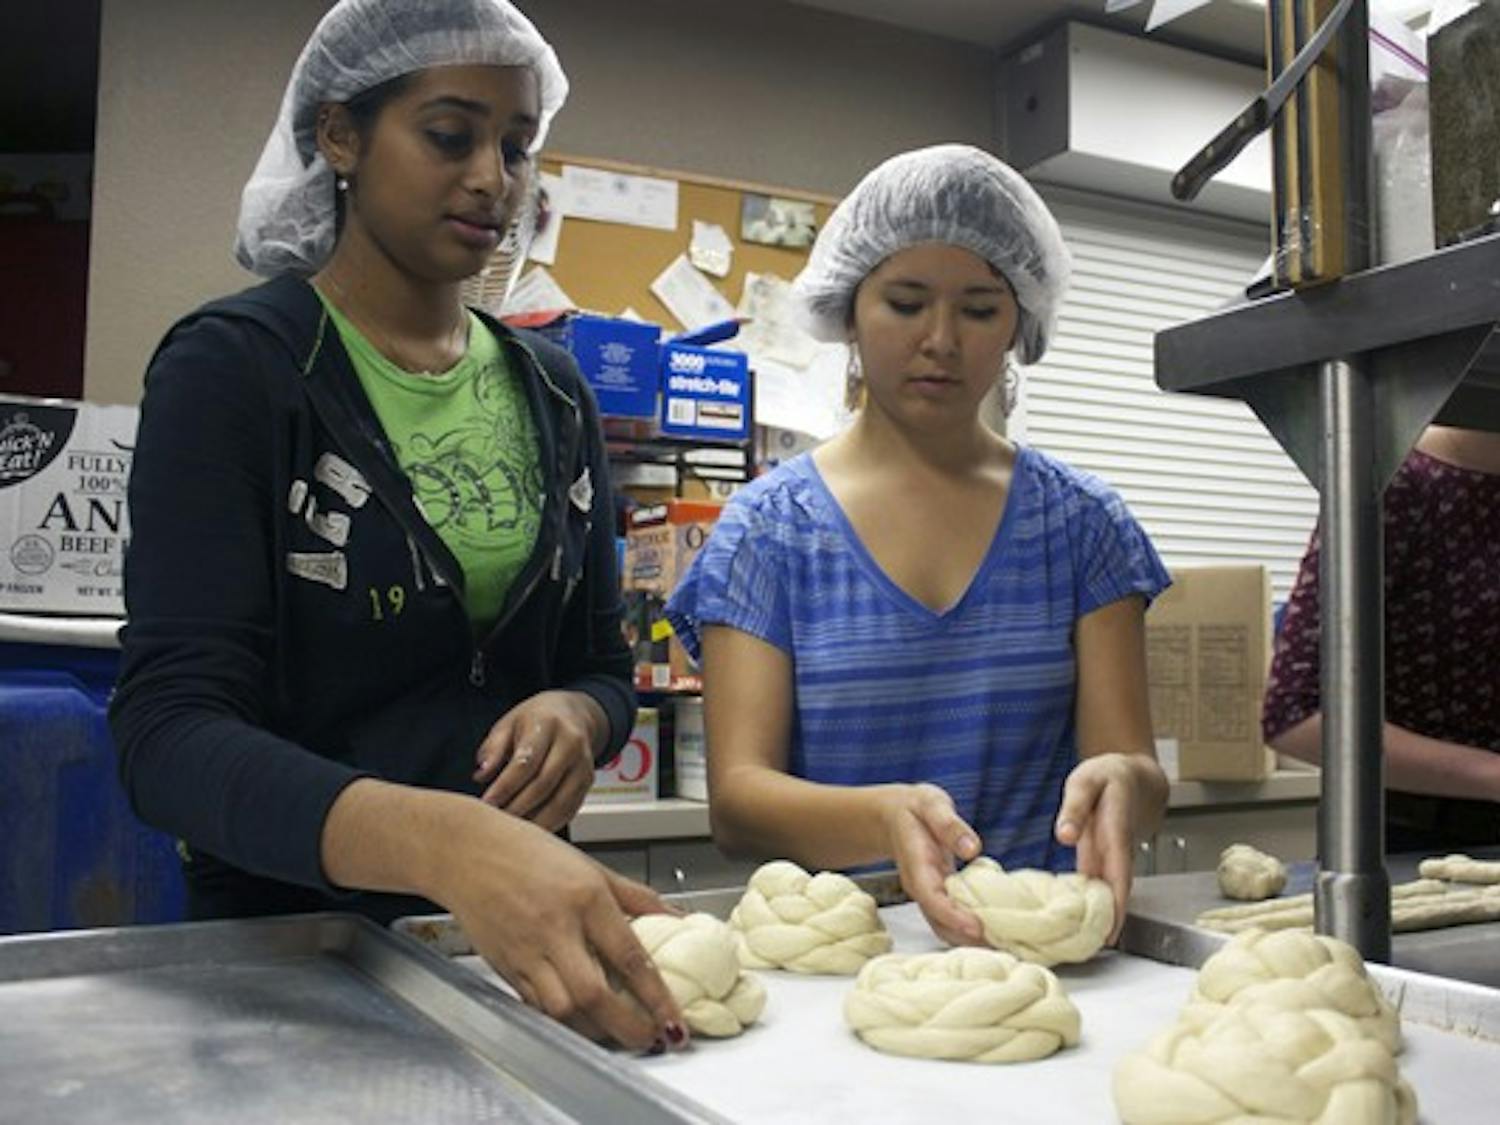 Health science freshman Sonia Kunthara and biomedical engineering freshman Allaina Honda lay the challah dough on the tray before putting it through the oven to sell for $4 a loaf at the ASU farmer's market Tuesday on the Tempe campus. All proceeds went to United Foods and the American Jewish World Service efforts in Sudan and Darfur. (Photo by Shawn Raymundo)